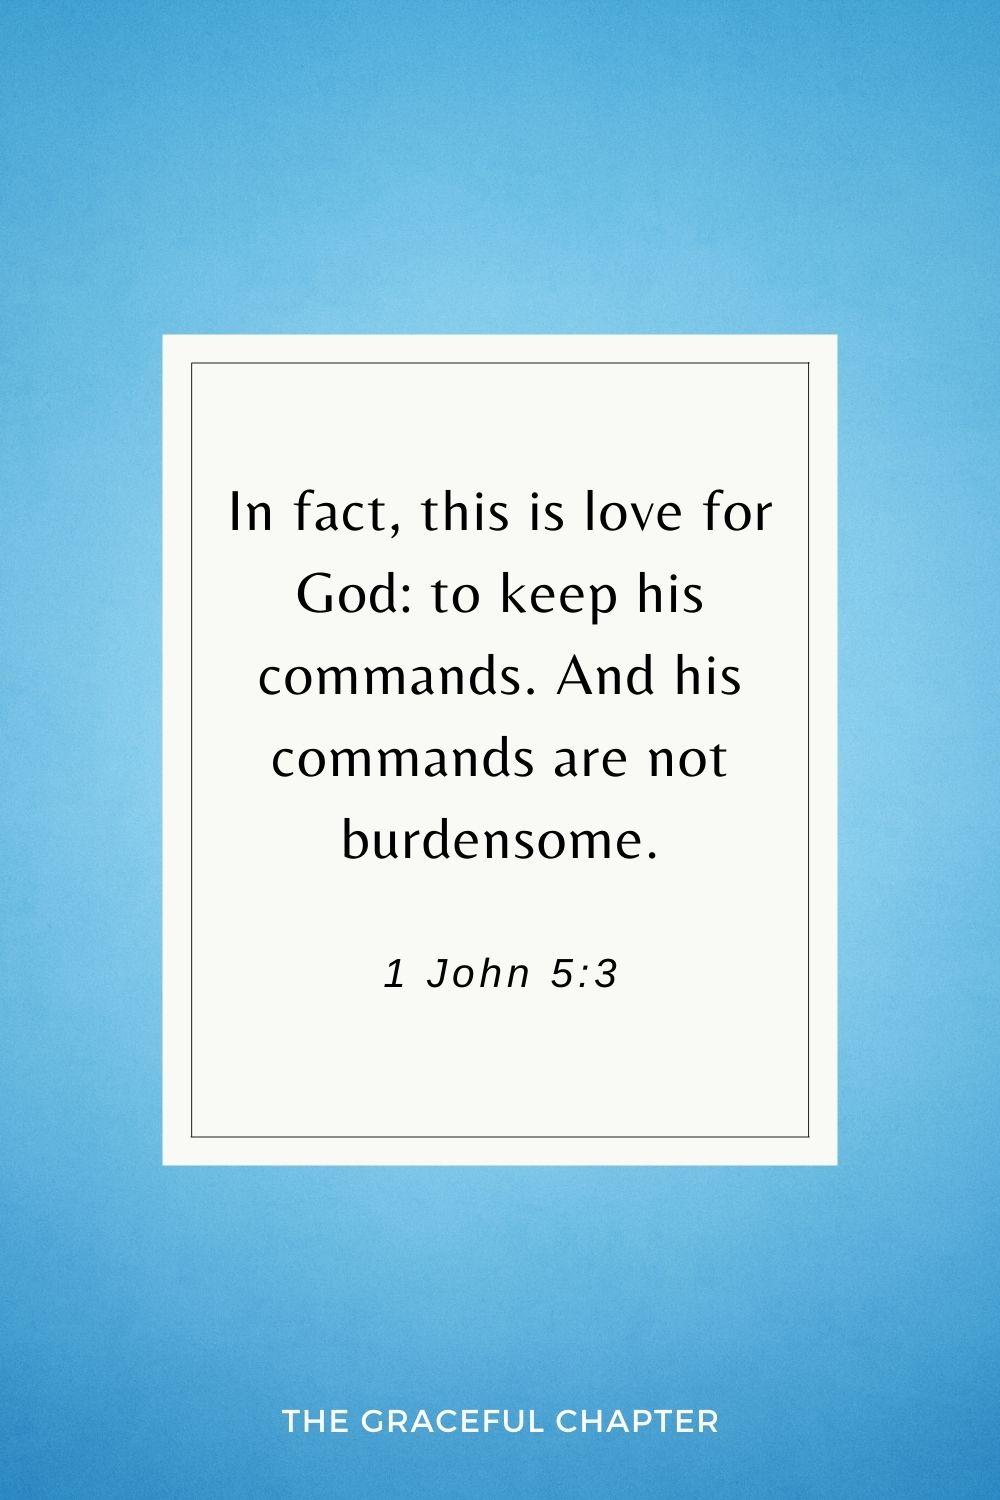 In fact, this is love for God: to keep his commands. And his commands are not burdensome. 1 John 5:3